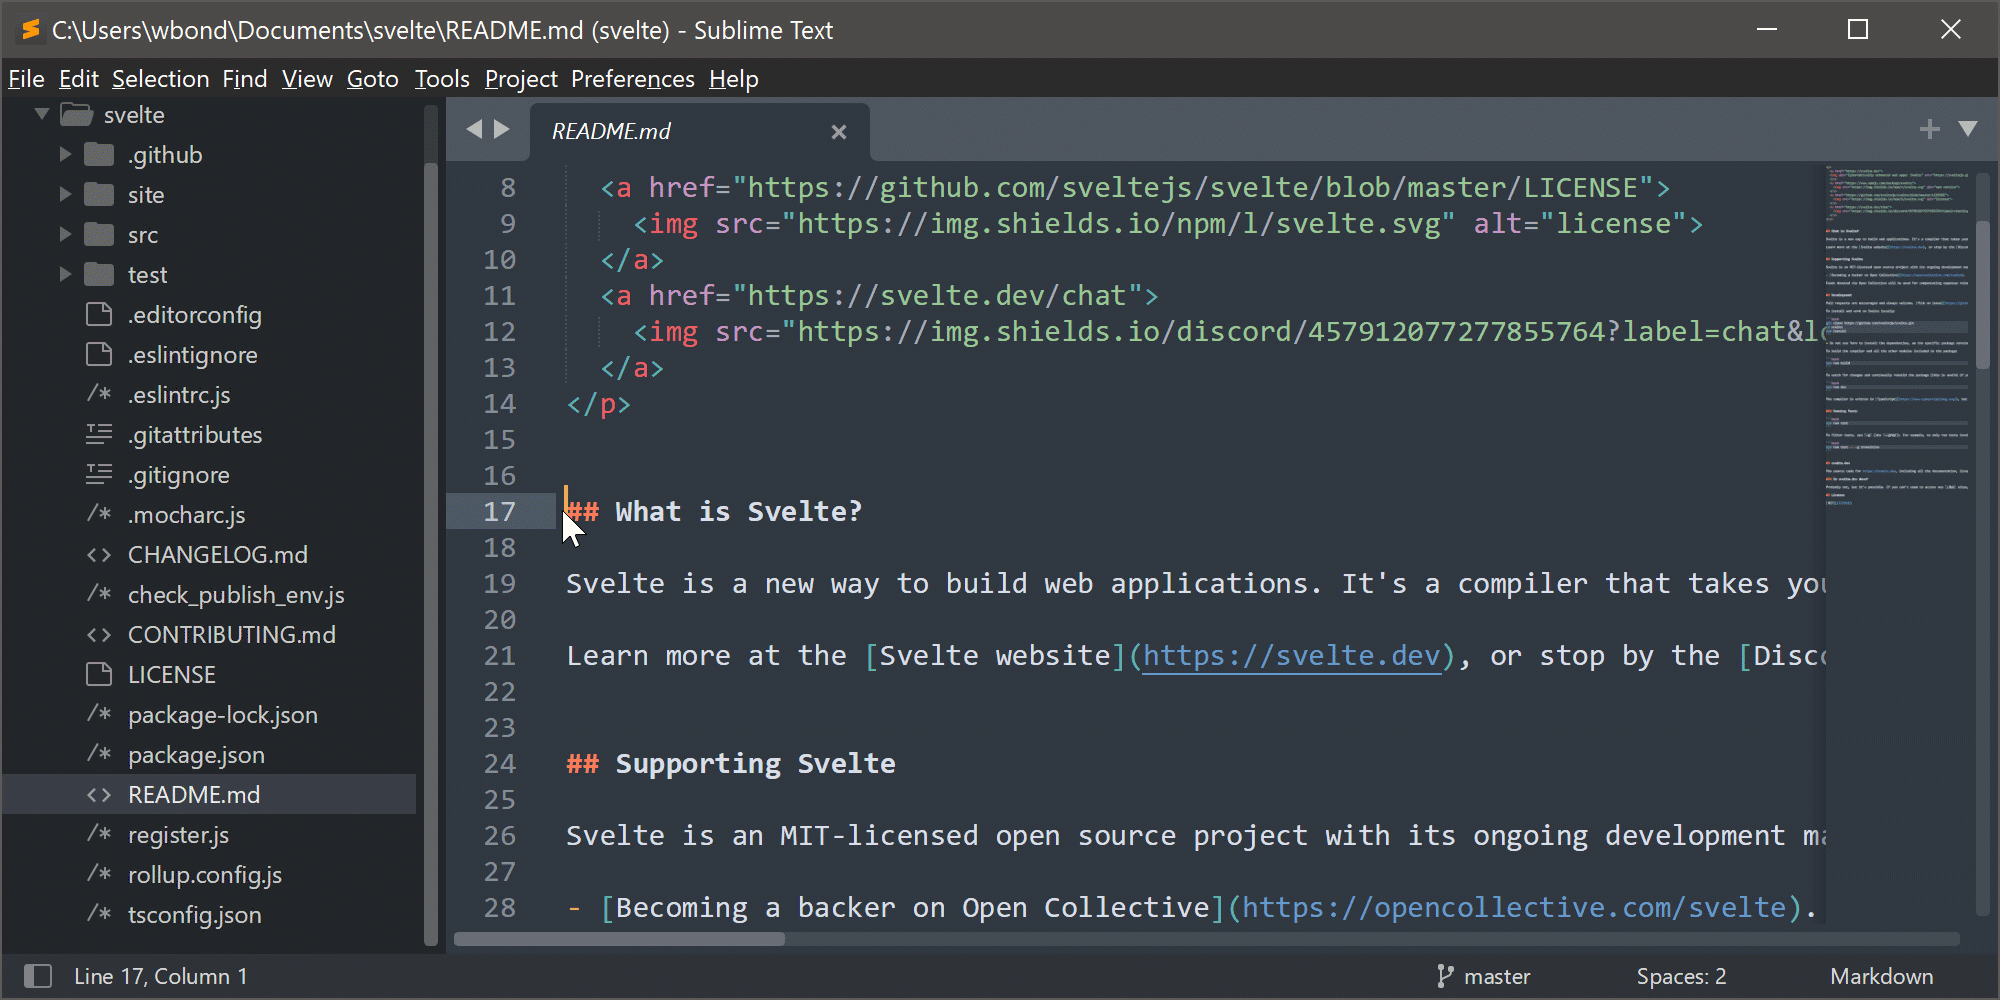 Sublime Text: The Programmer's Companion